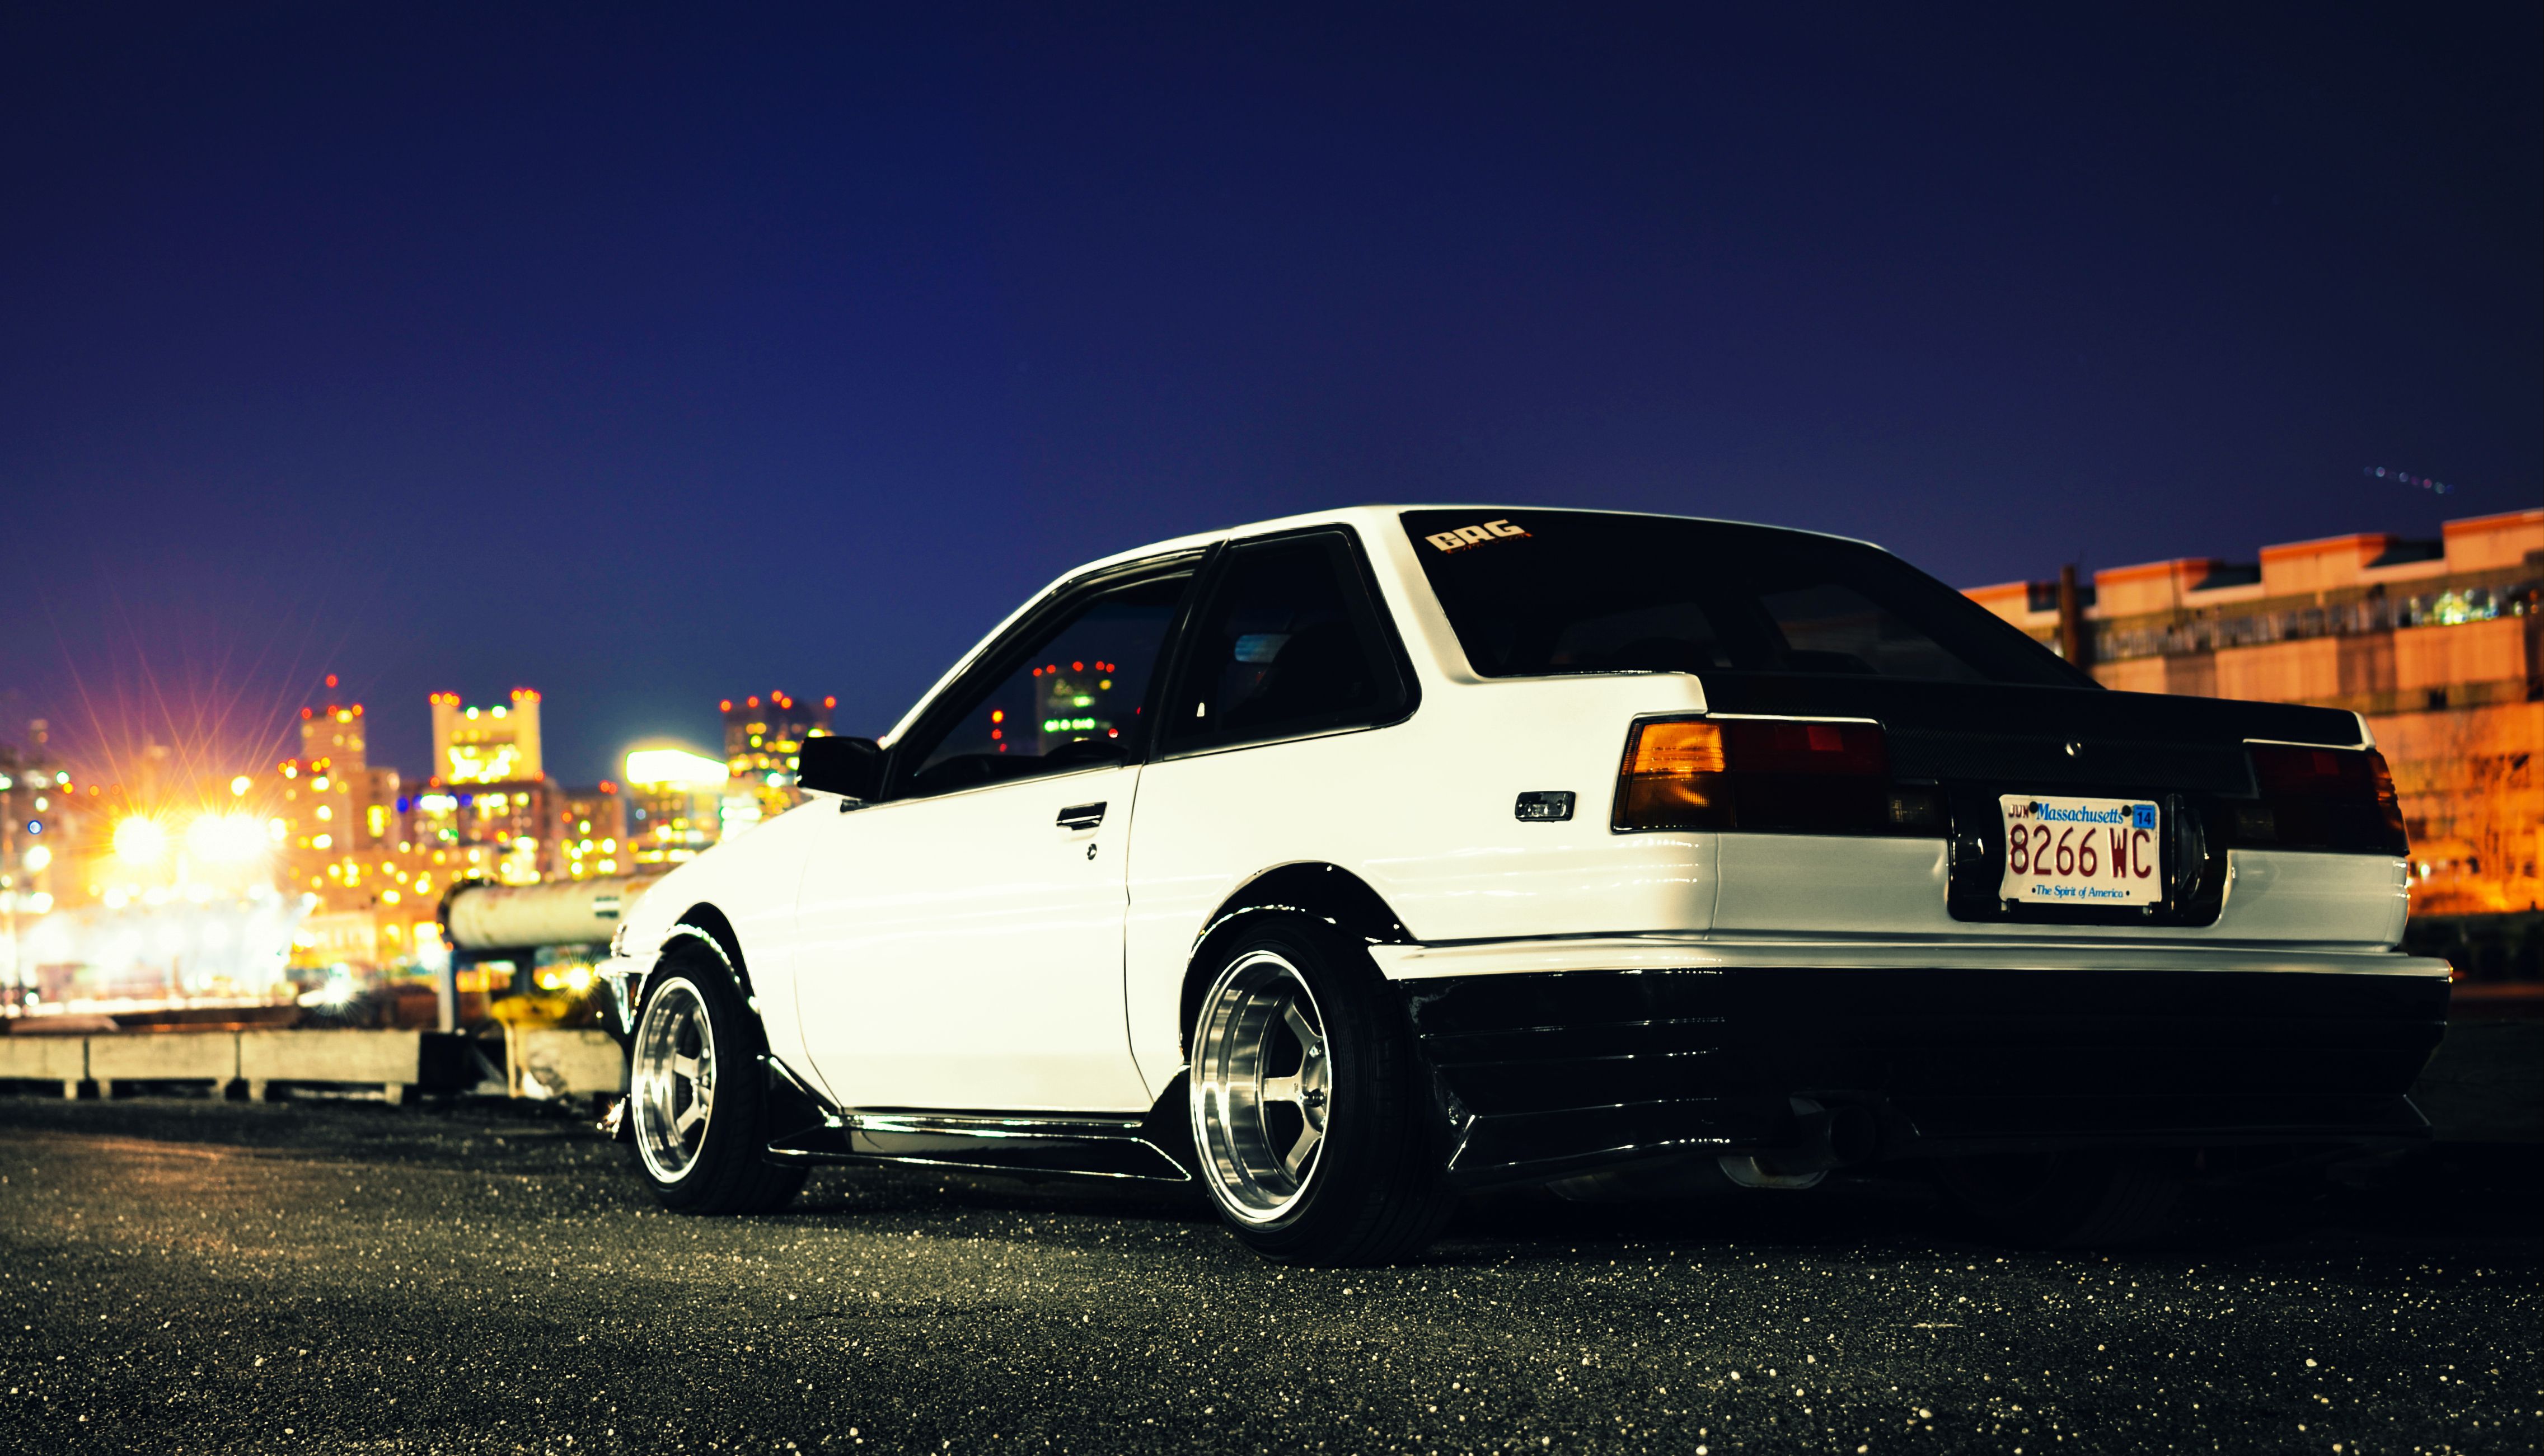 Download Toyota Ae86 wallpaper for mobile phone, free Toyota Ae86 HD picture